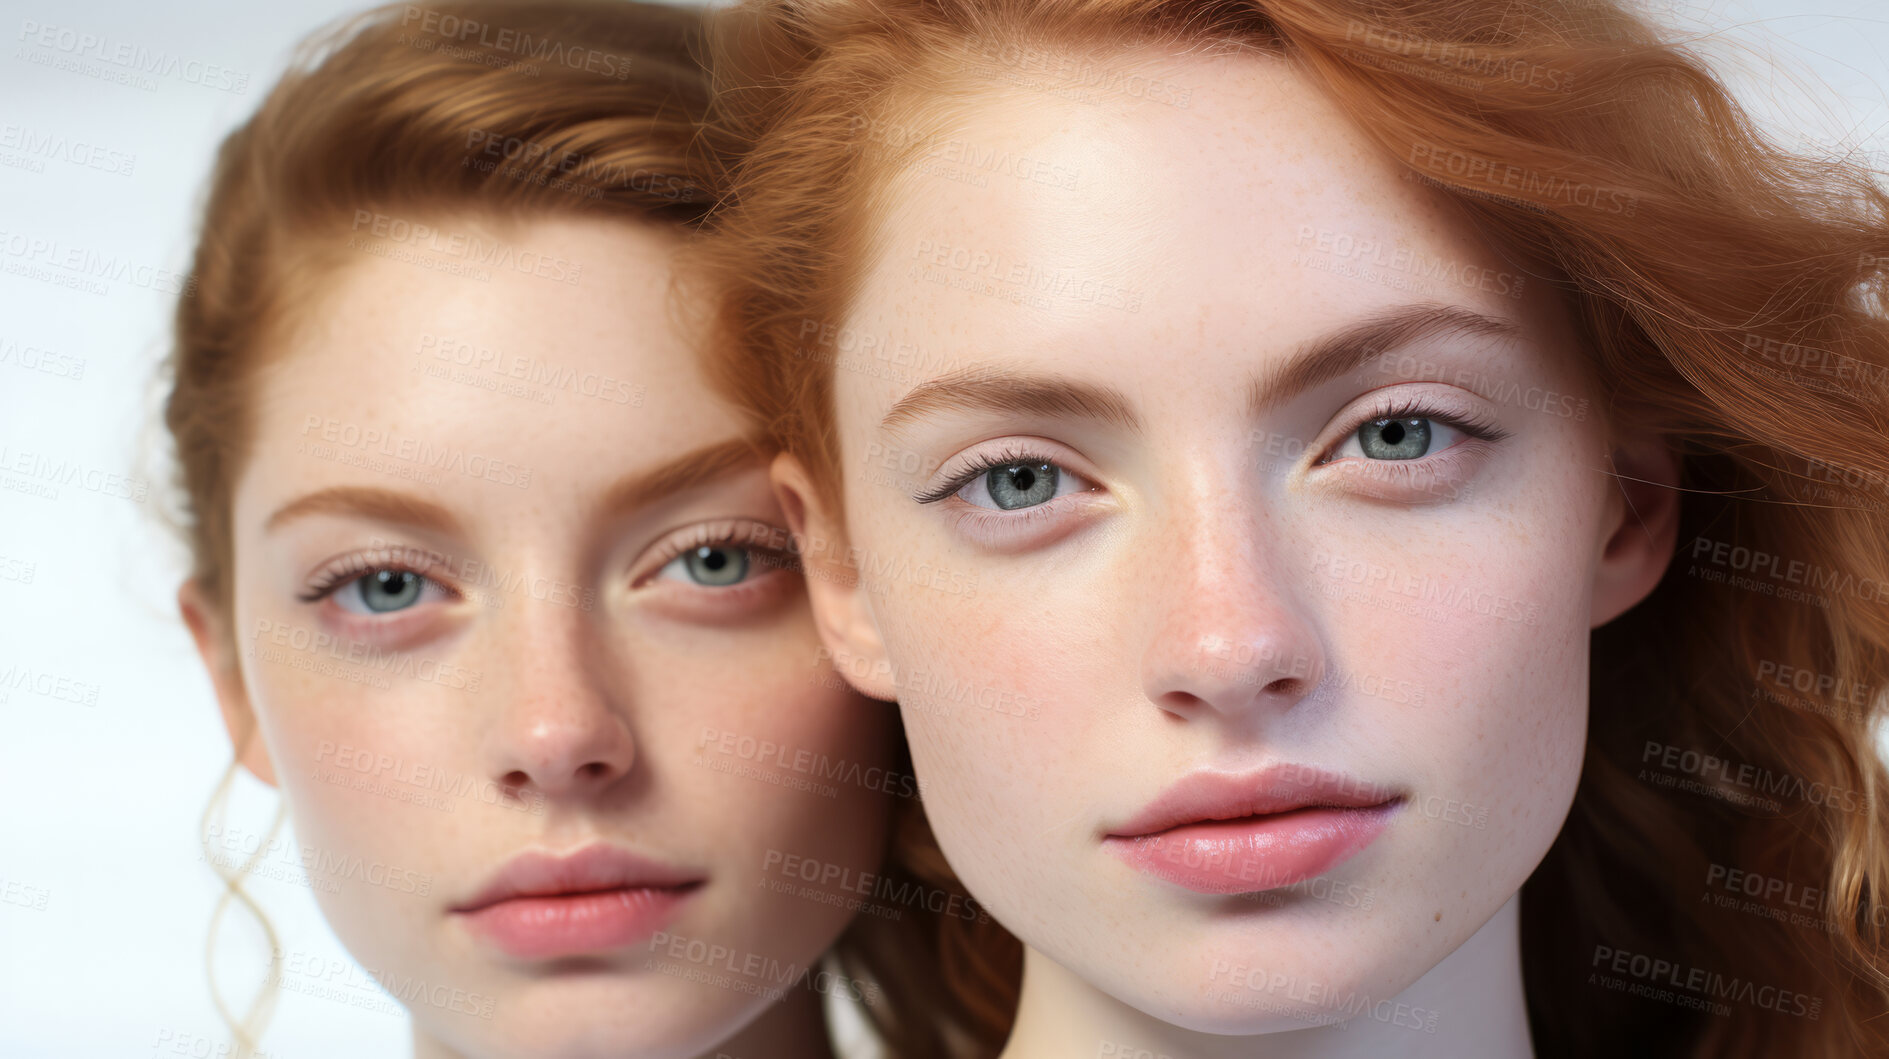 Buy stock photo Close-up portrait of two models. Make-up, freckle skin. Natural light. Fashion, editorial concept.